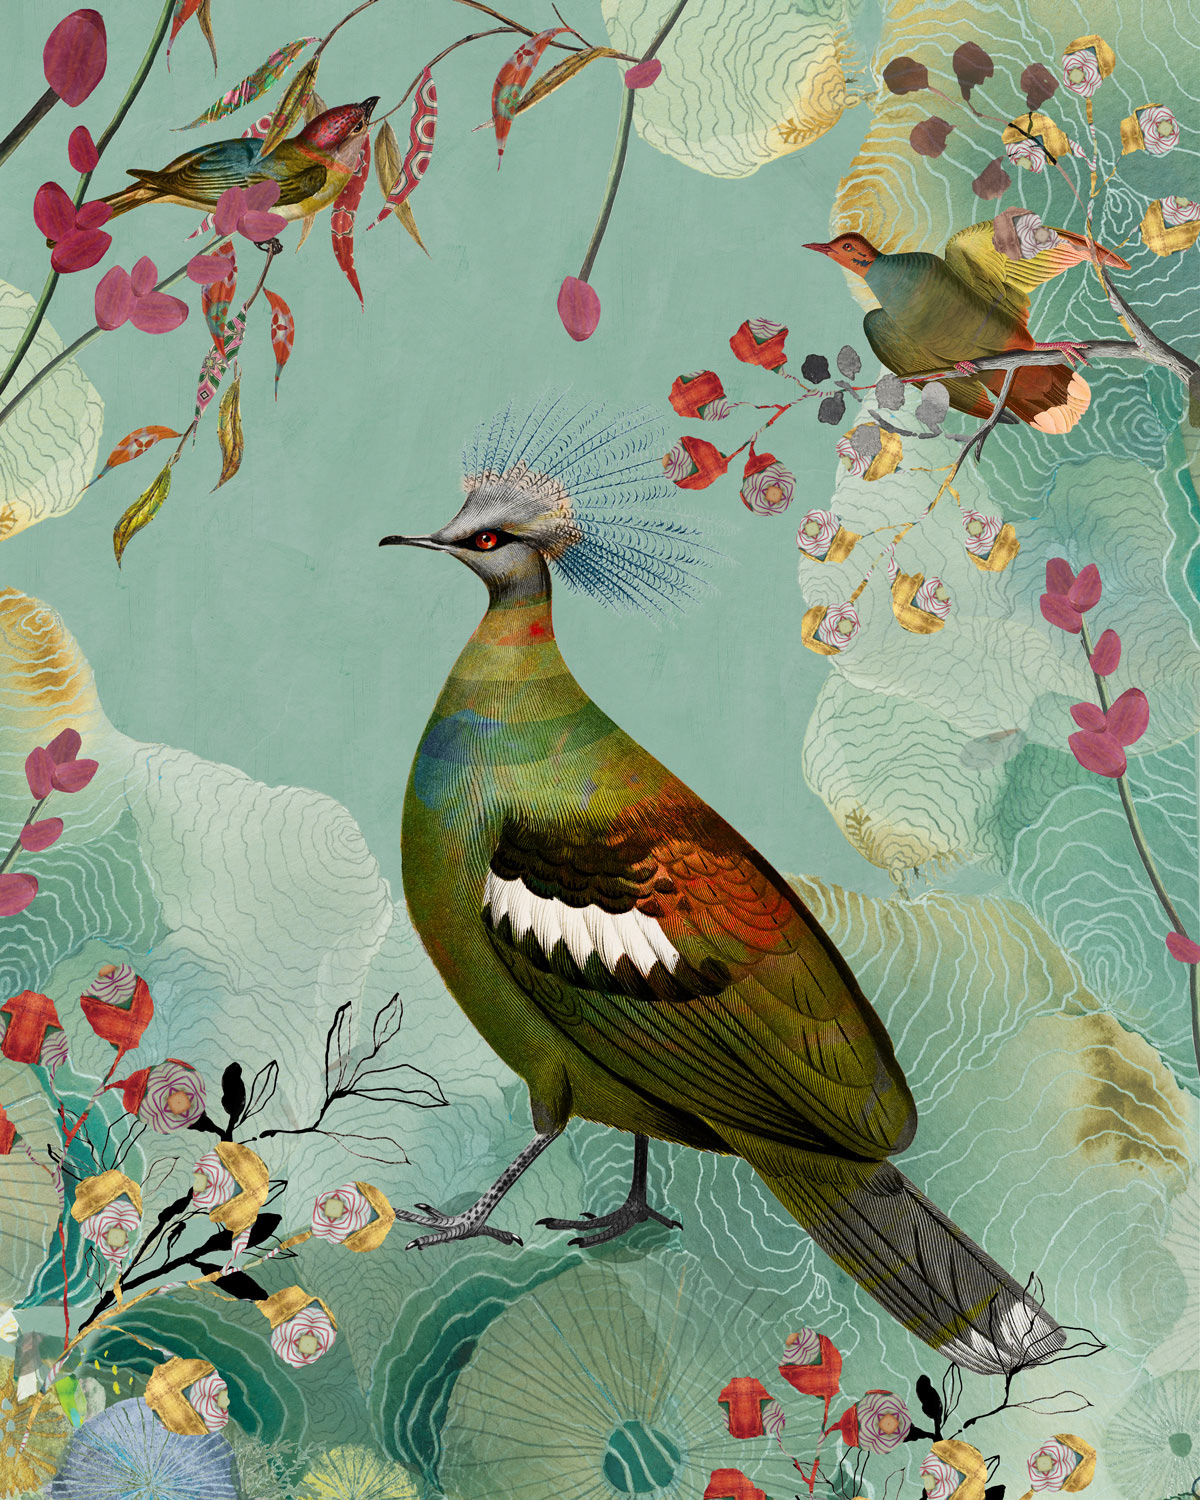 Birds of Paradise. Colorful dreamy imaginative birds in an abstract surrealistic background.